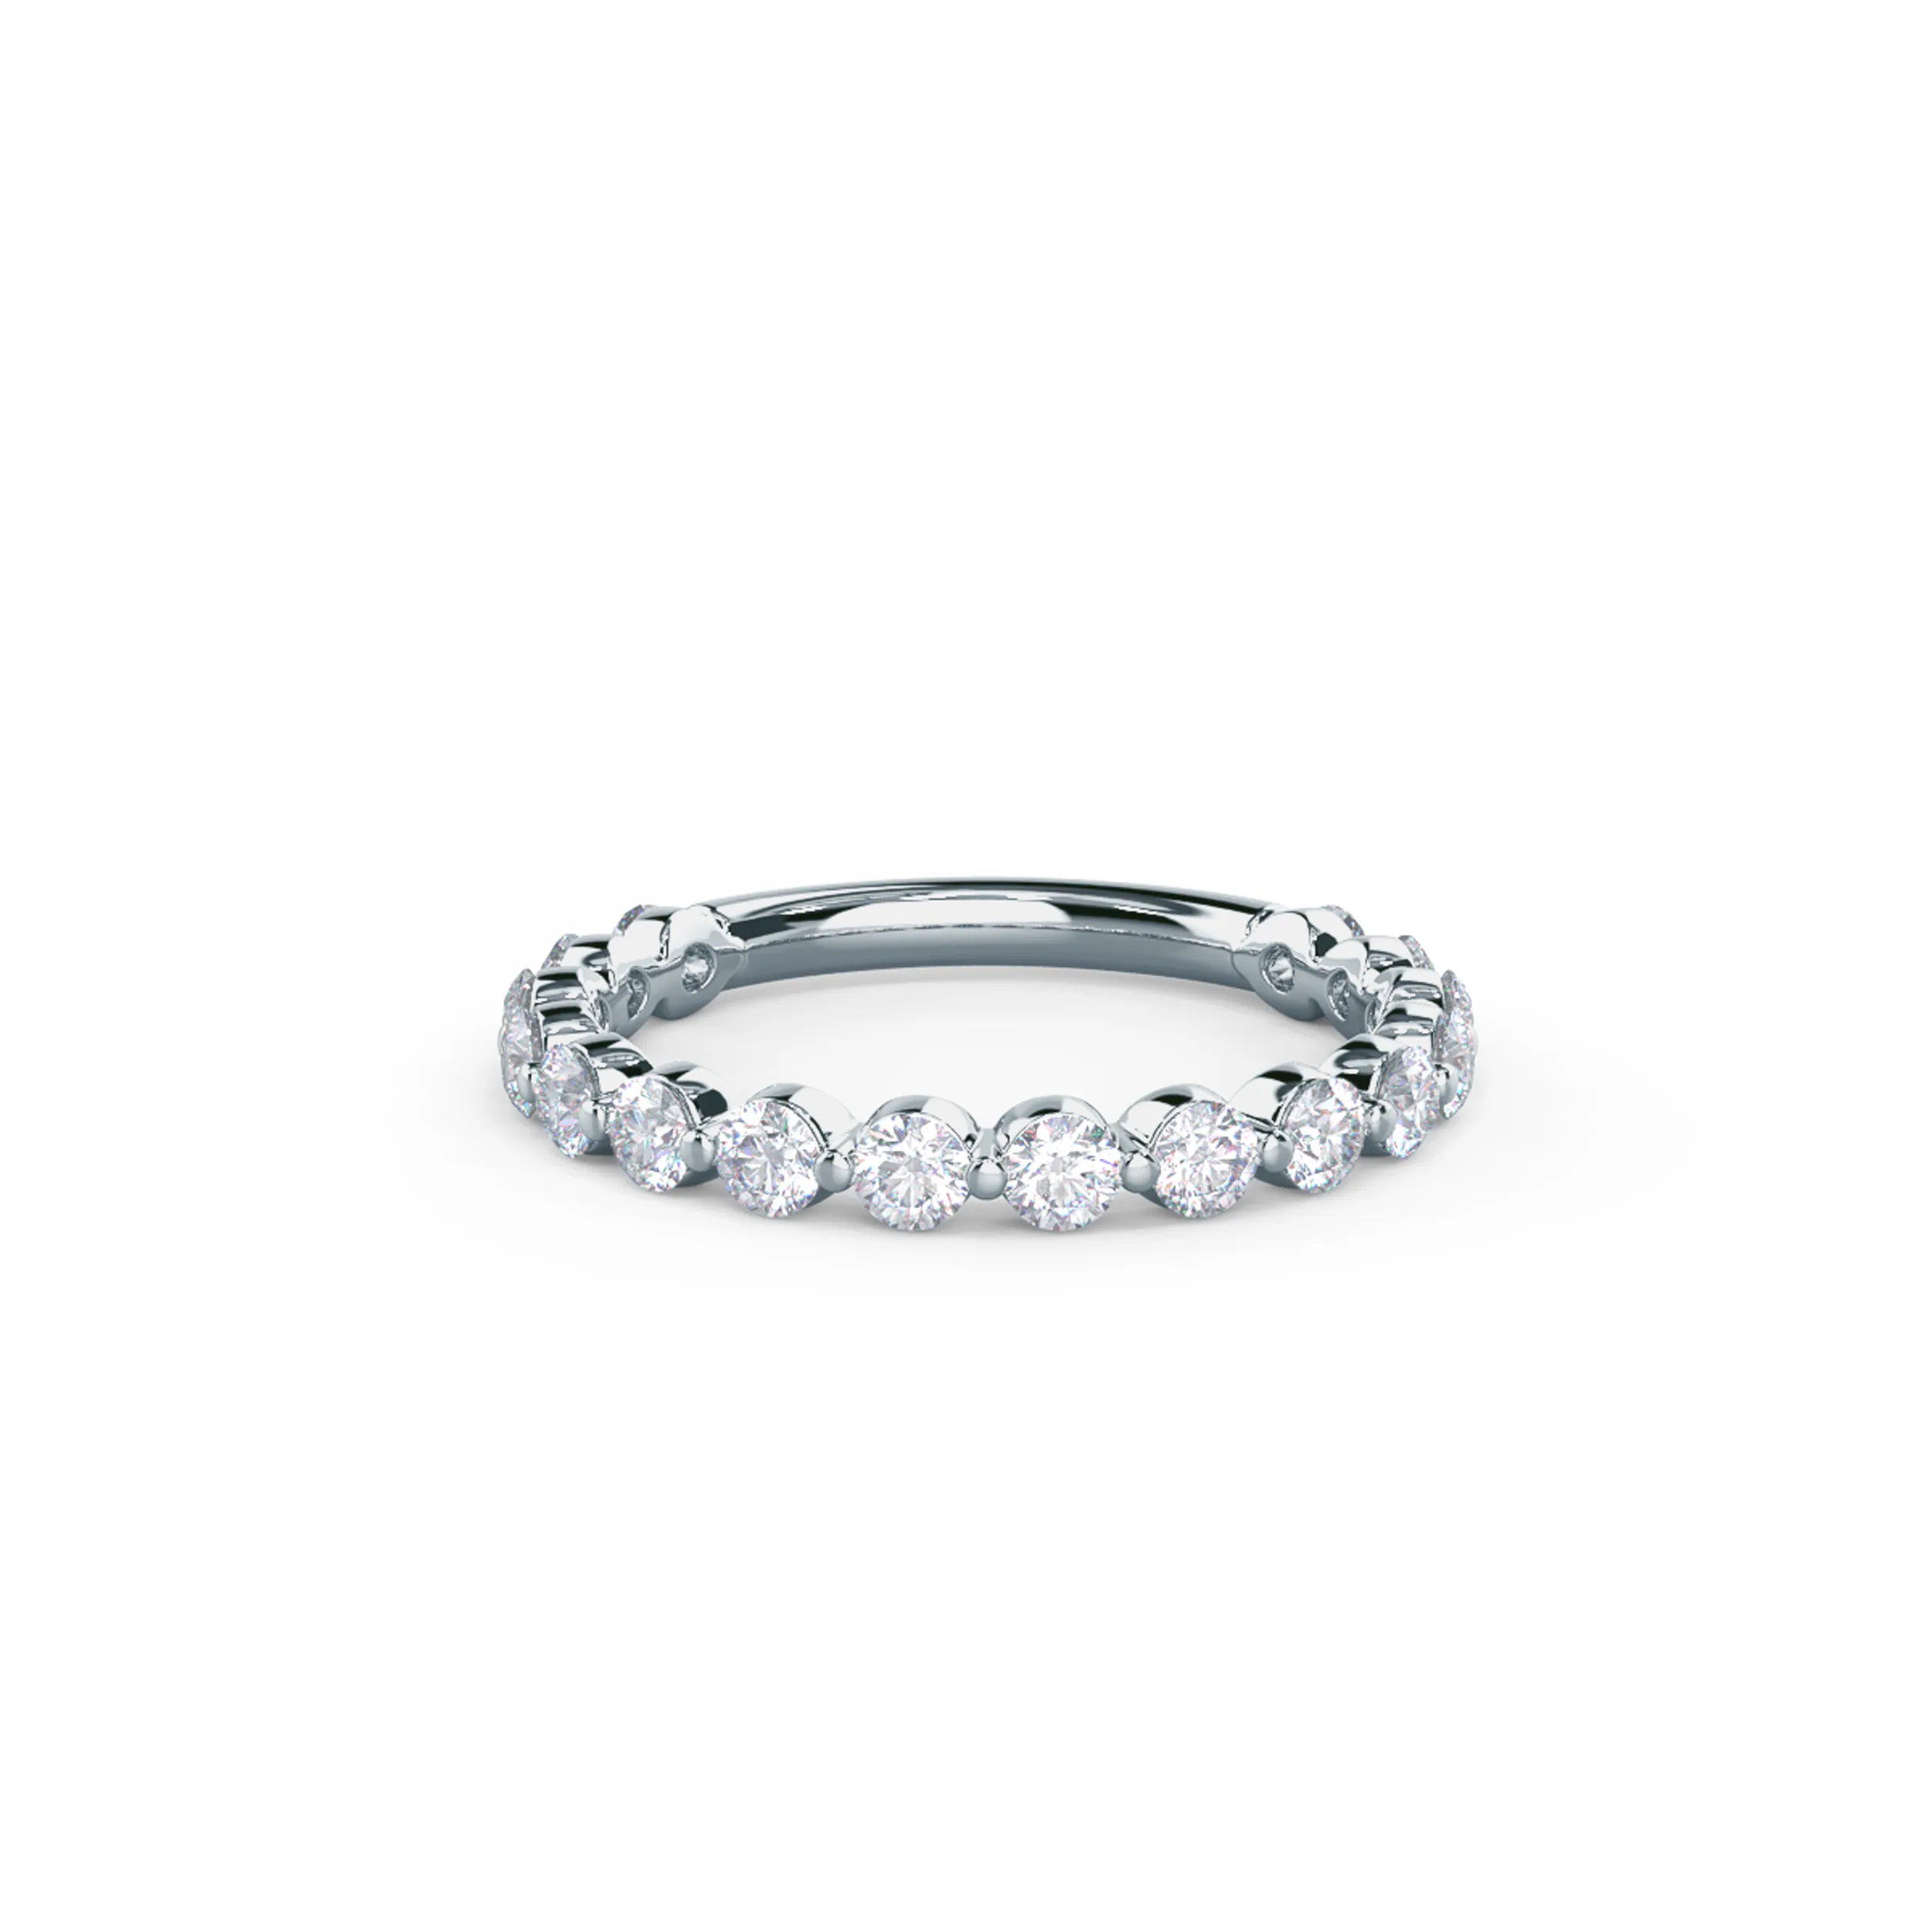 Hand Selected 0.8 Carat Round Diamonds Shared Prong Three Quarter Band in 18k White Gold (Main View)